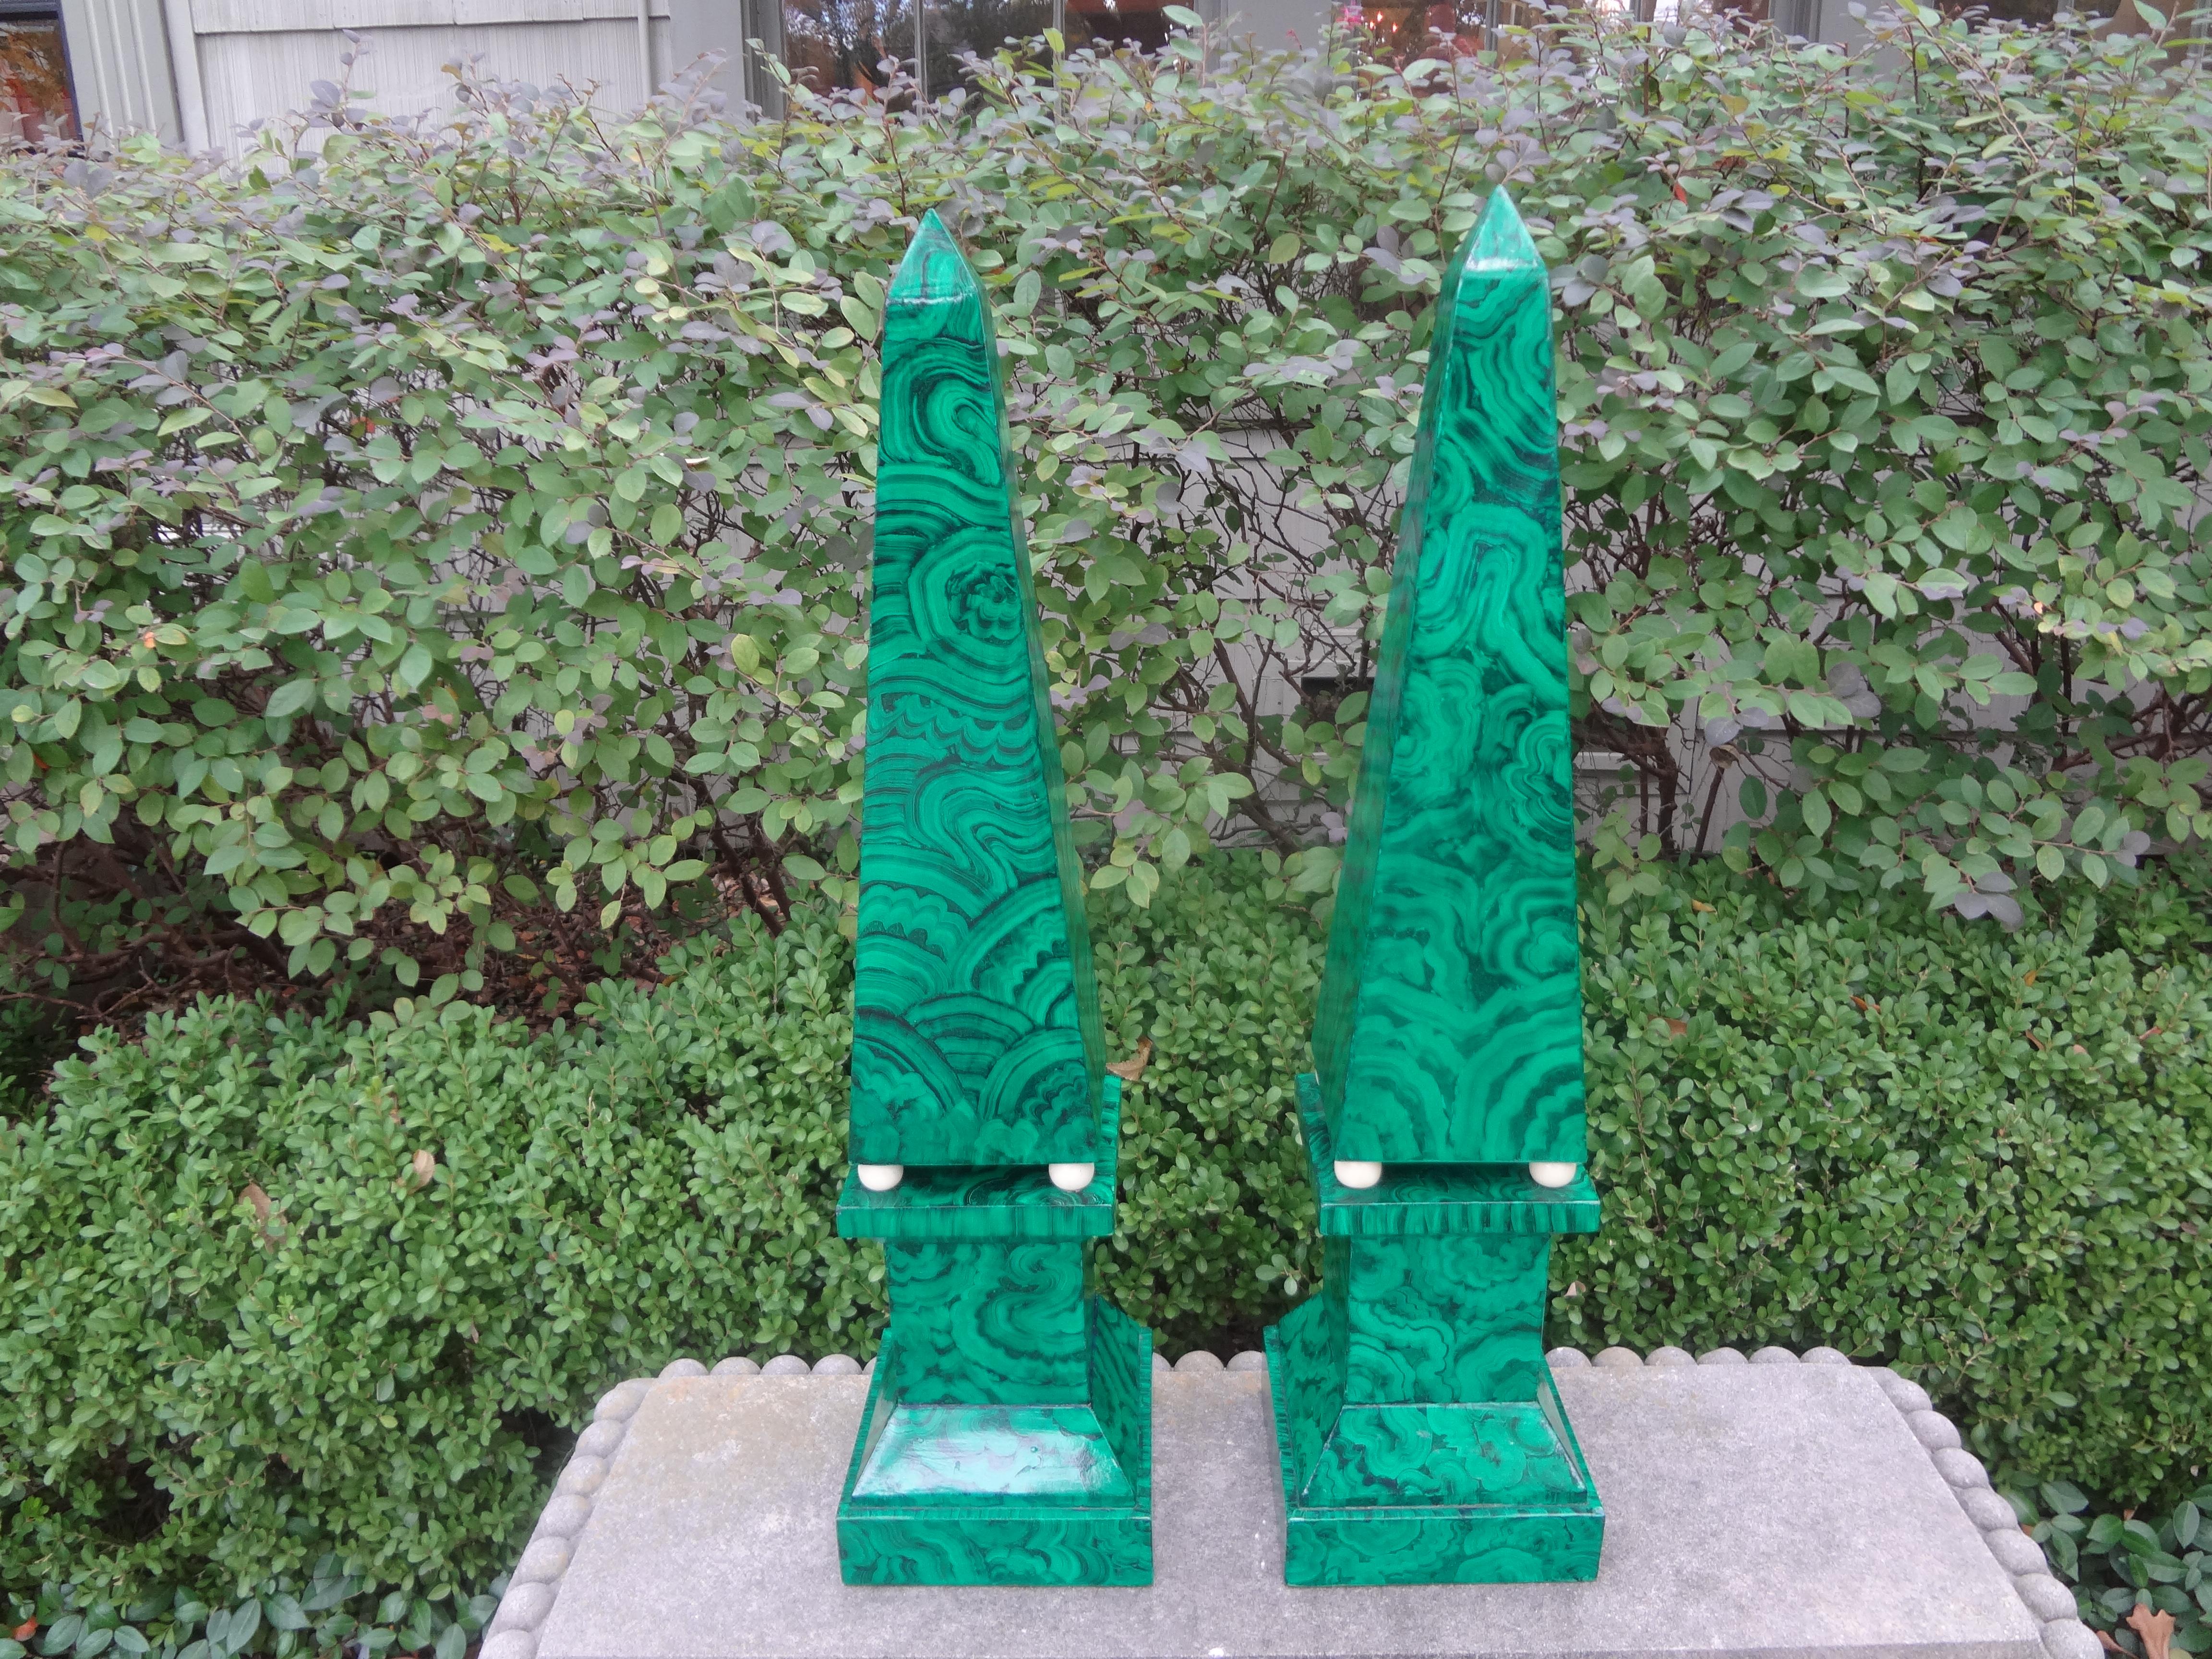 Pair of large carved wood faux Malachite Obelisks.
Offered is a stunning pair of Hollywood Regency style carved wood obelisks. This pair of large scale hand decorated neoclassical faux malachite obelisks are statement pieces.